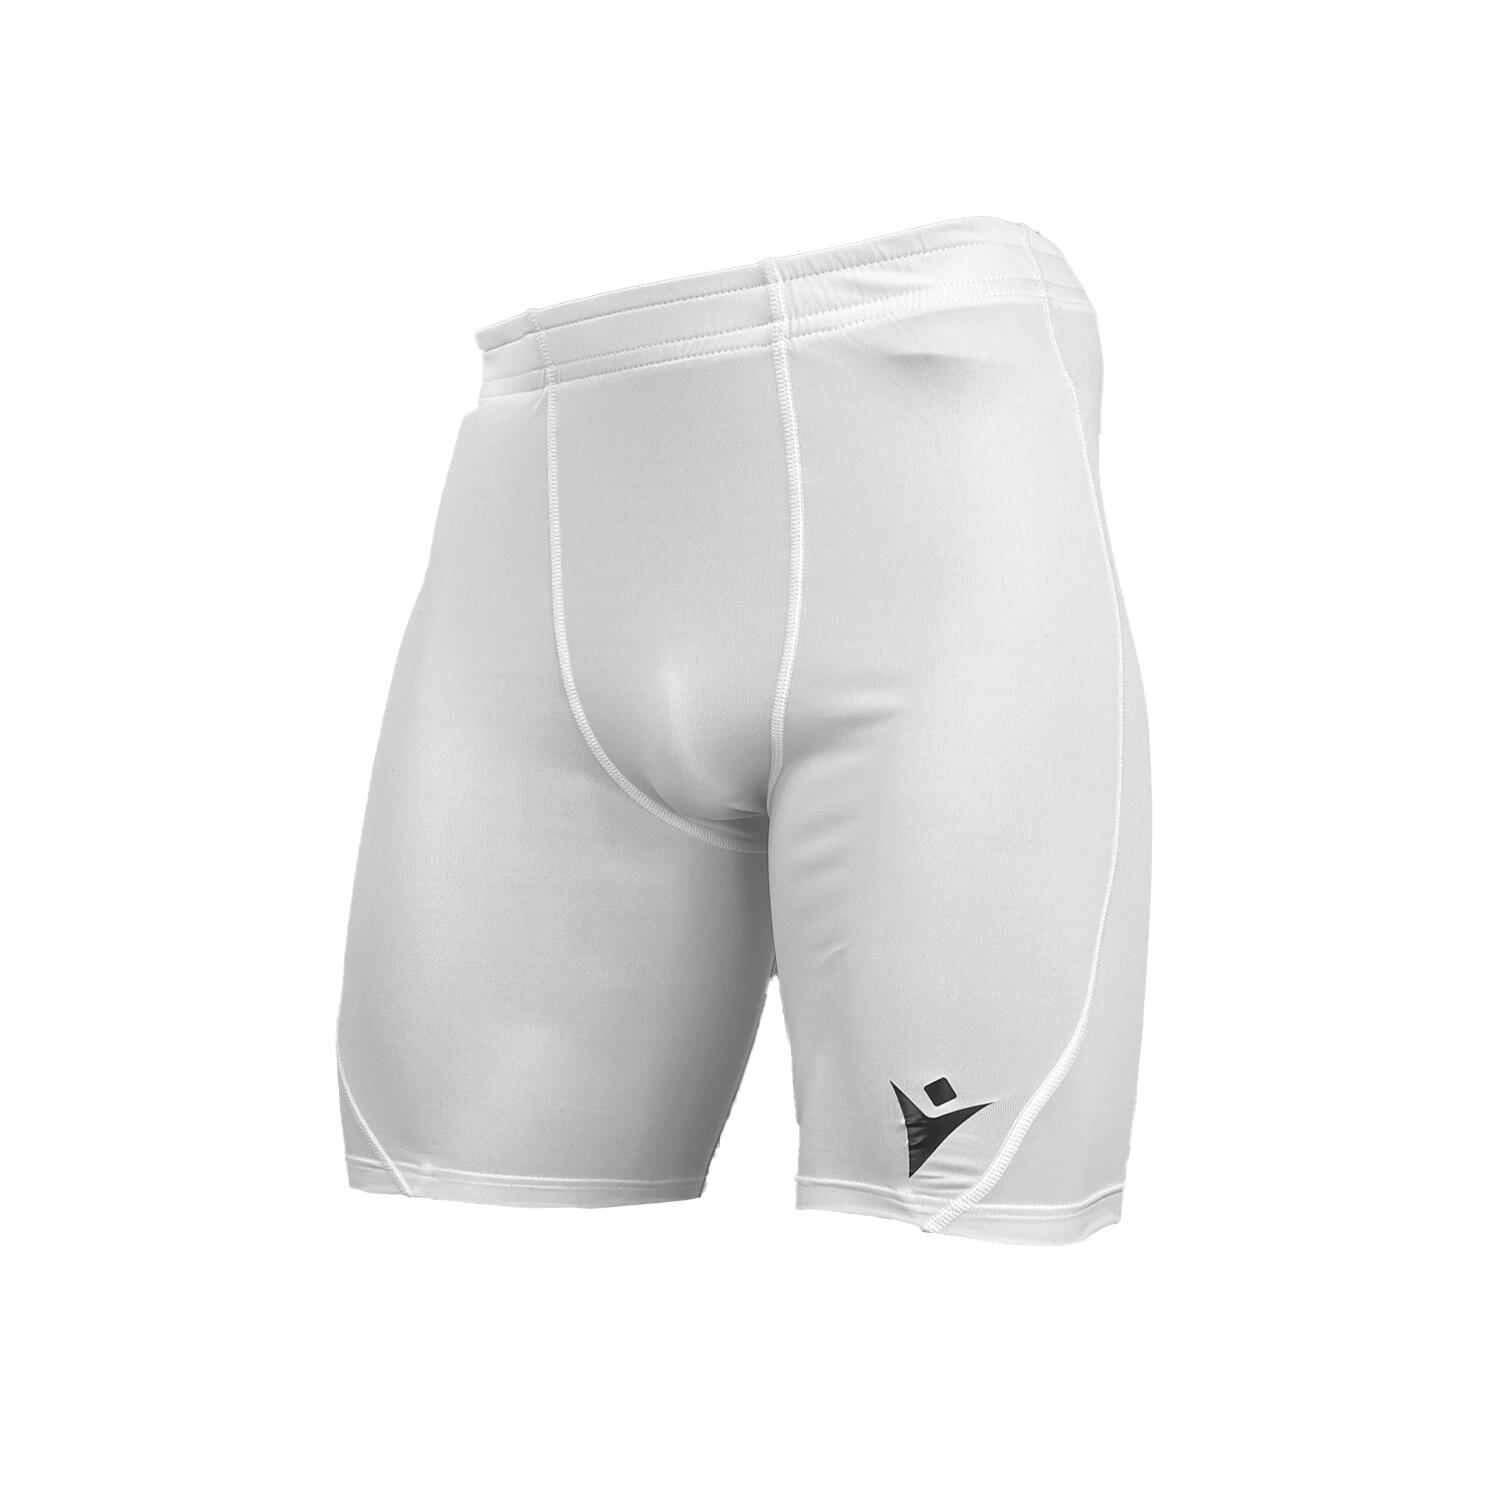 Macron Player Issue Match Day Base Layer Under Shorts 1/3